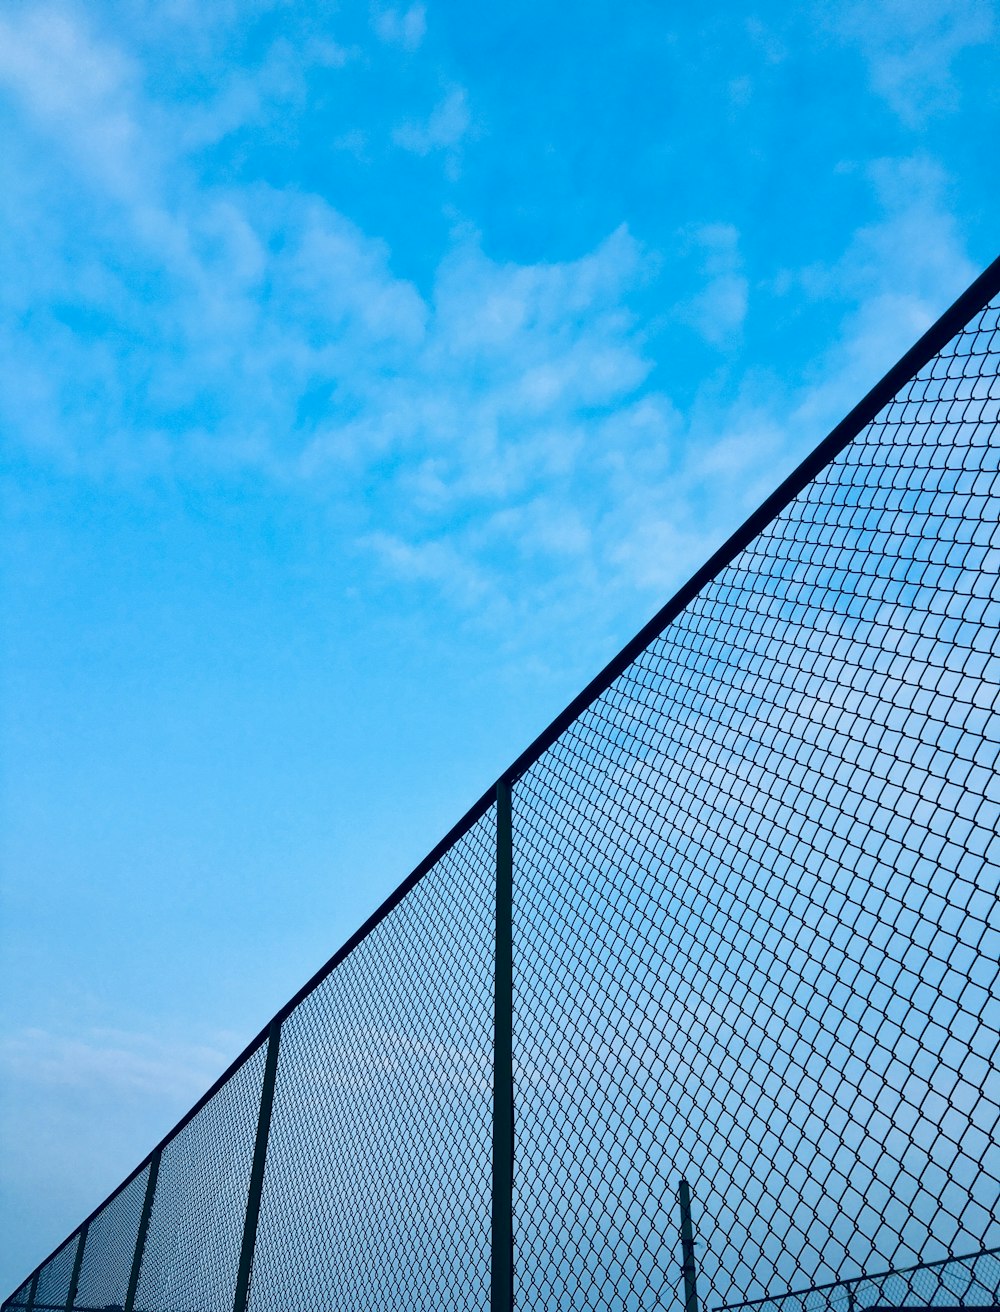 chain-link fence under blue sky during daytime